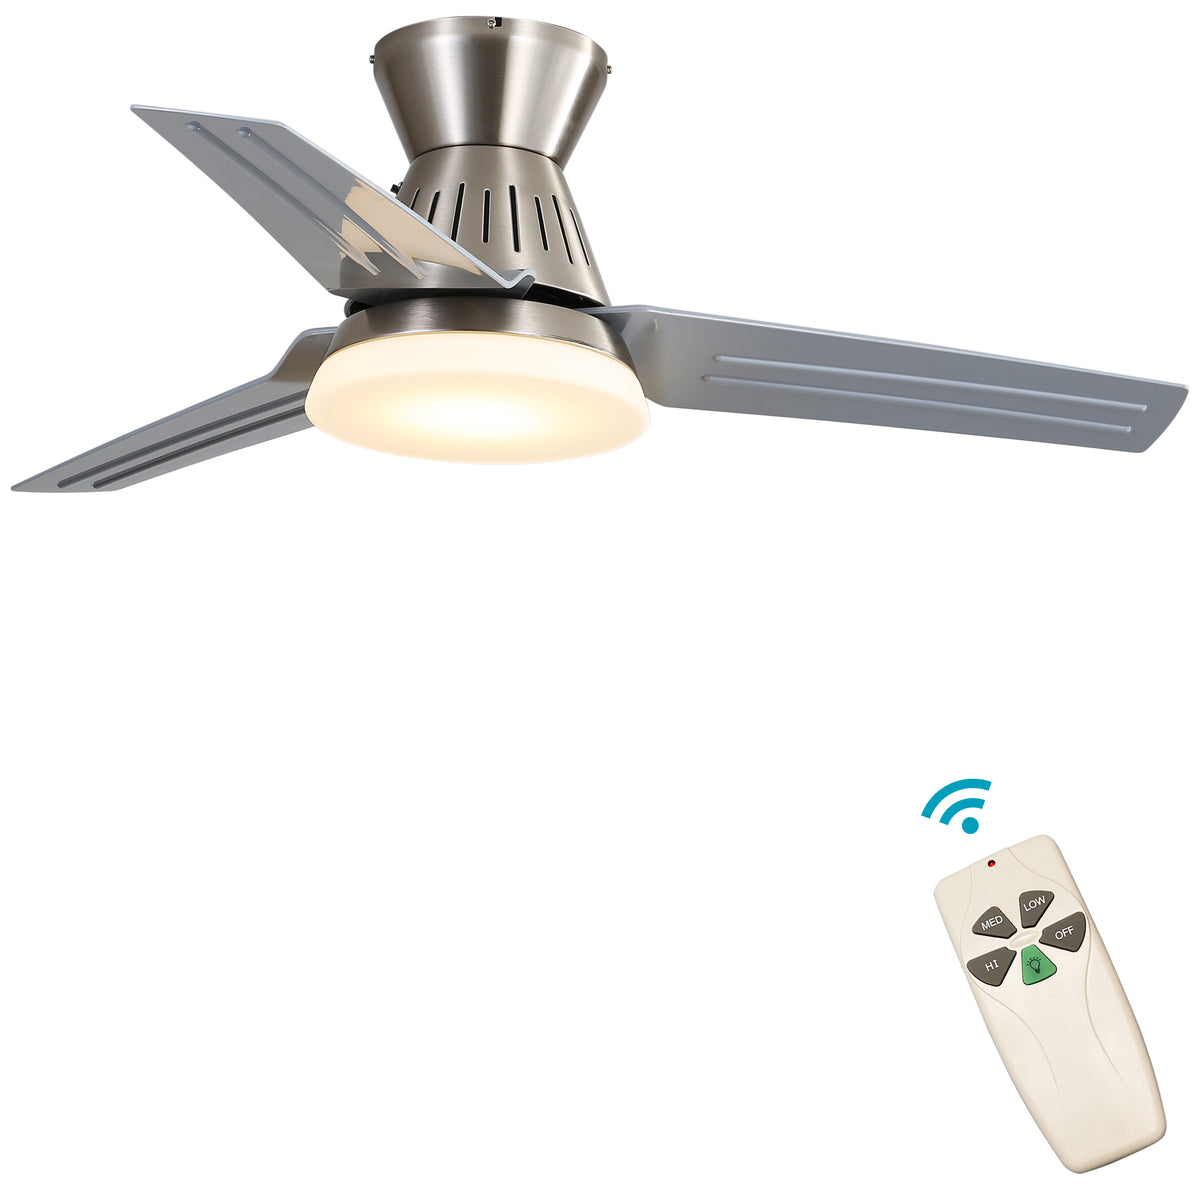 New Style New Bronze Remote LED 52 Ceiling Fans For Bedroom,Living Room,Dining Room Including Motor,5-Light,5-Blades,Remote Switch Indoor Ceiling Fan Light Fixtures FINXIN FXCF03